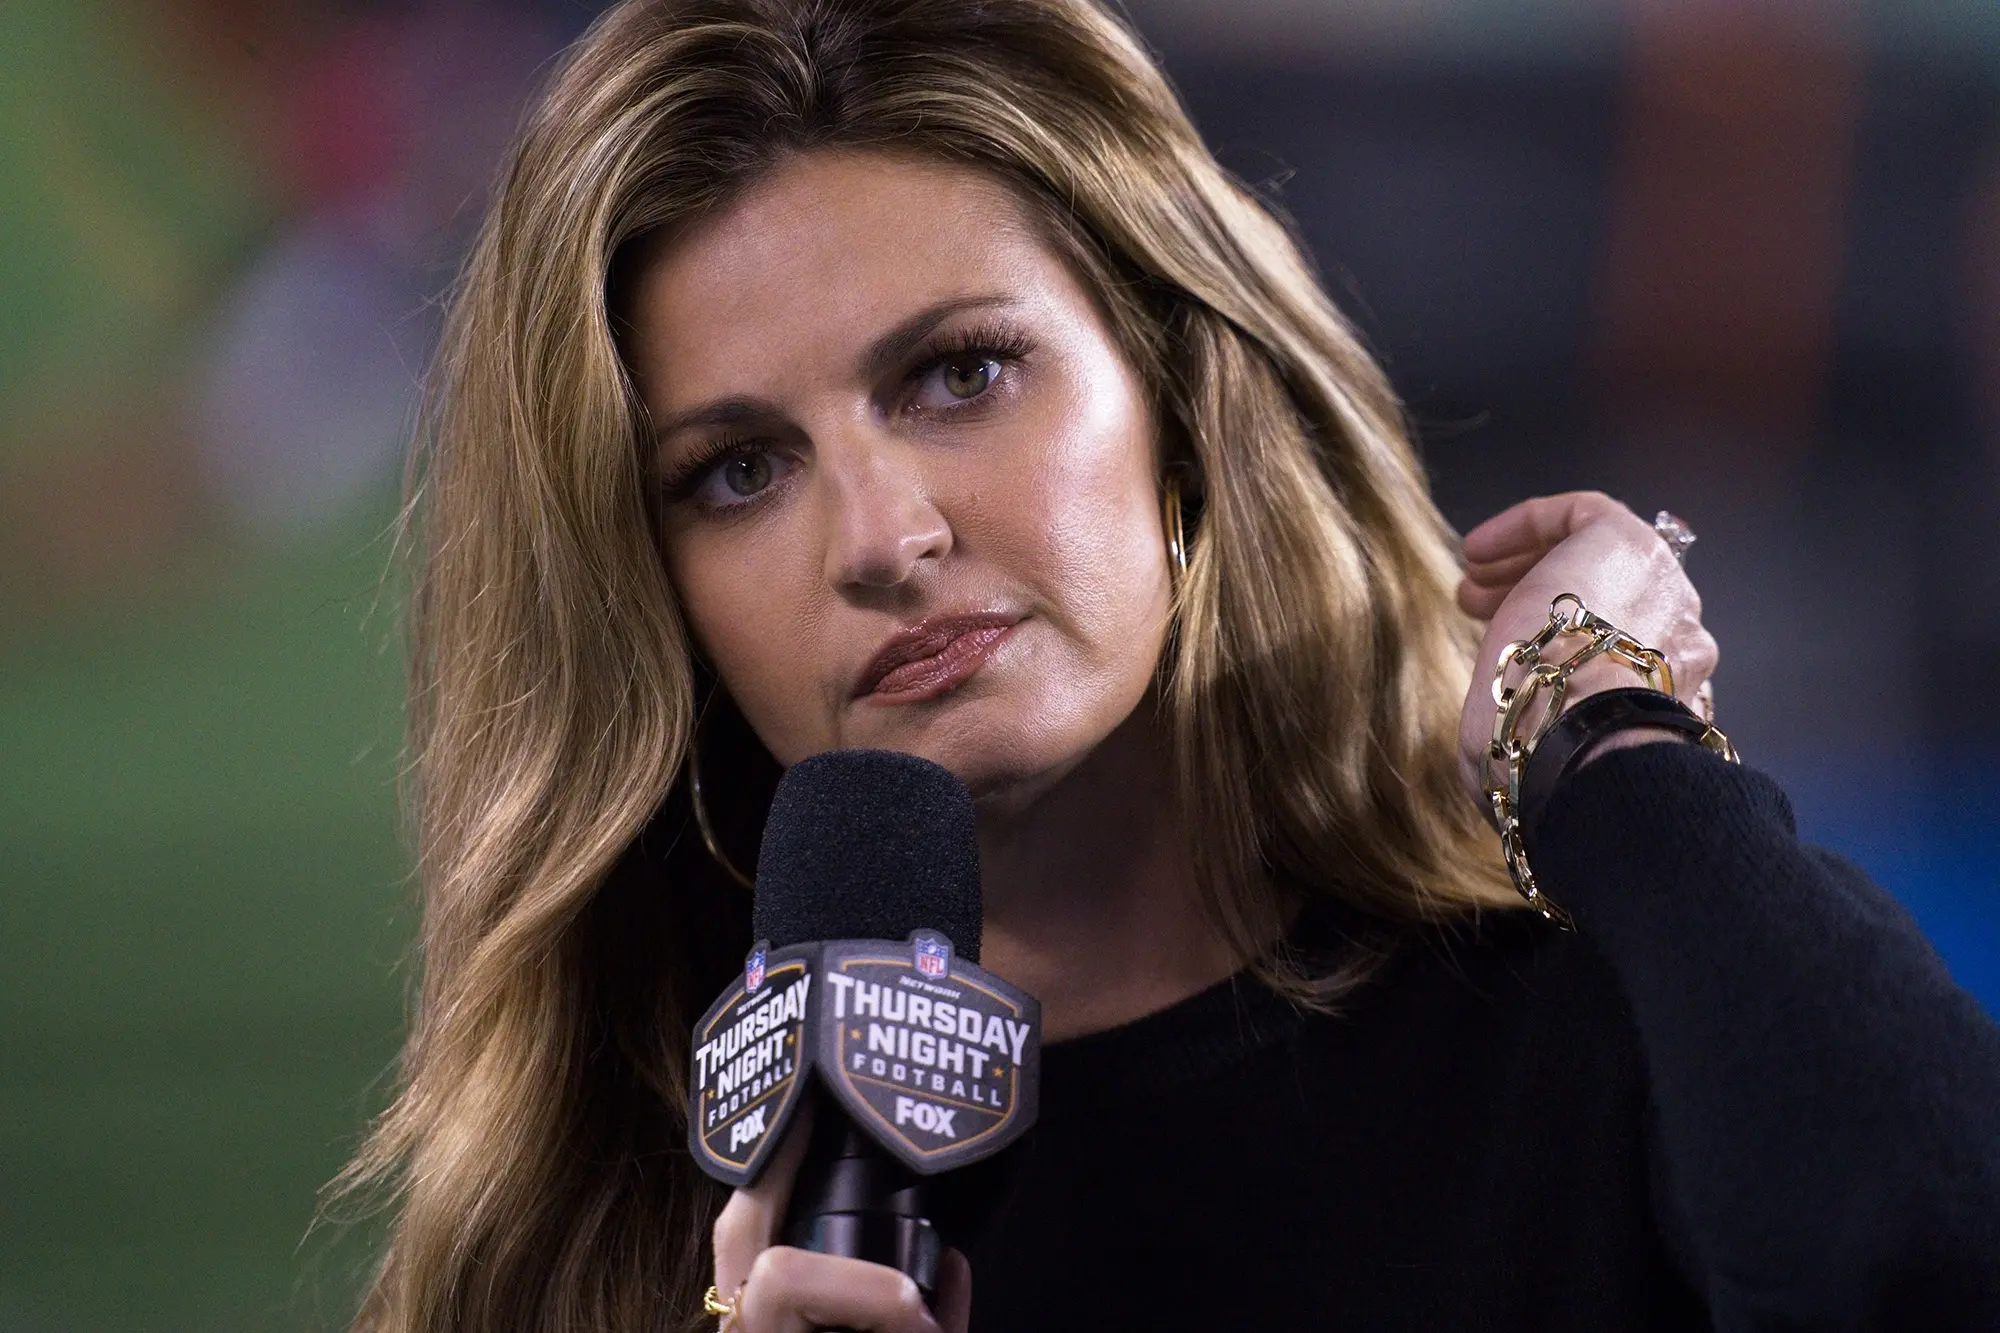 Erin Andrews Has Now Acknowledged That She Invented Fictitious Halftime Reports From NFL Sidelines, Saying, “I’ve Done That Too”